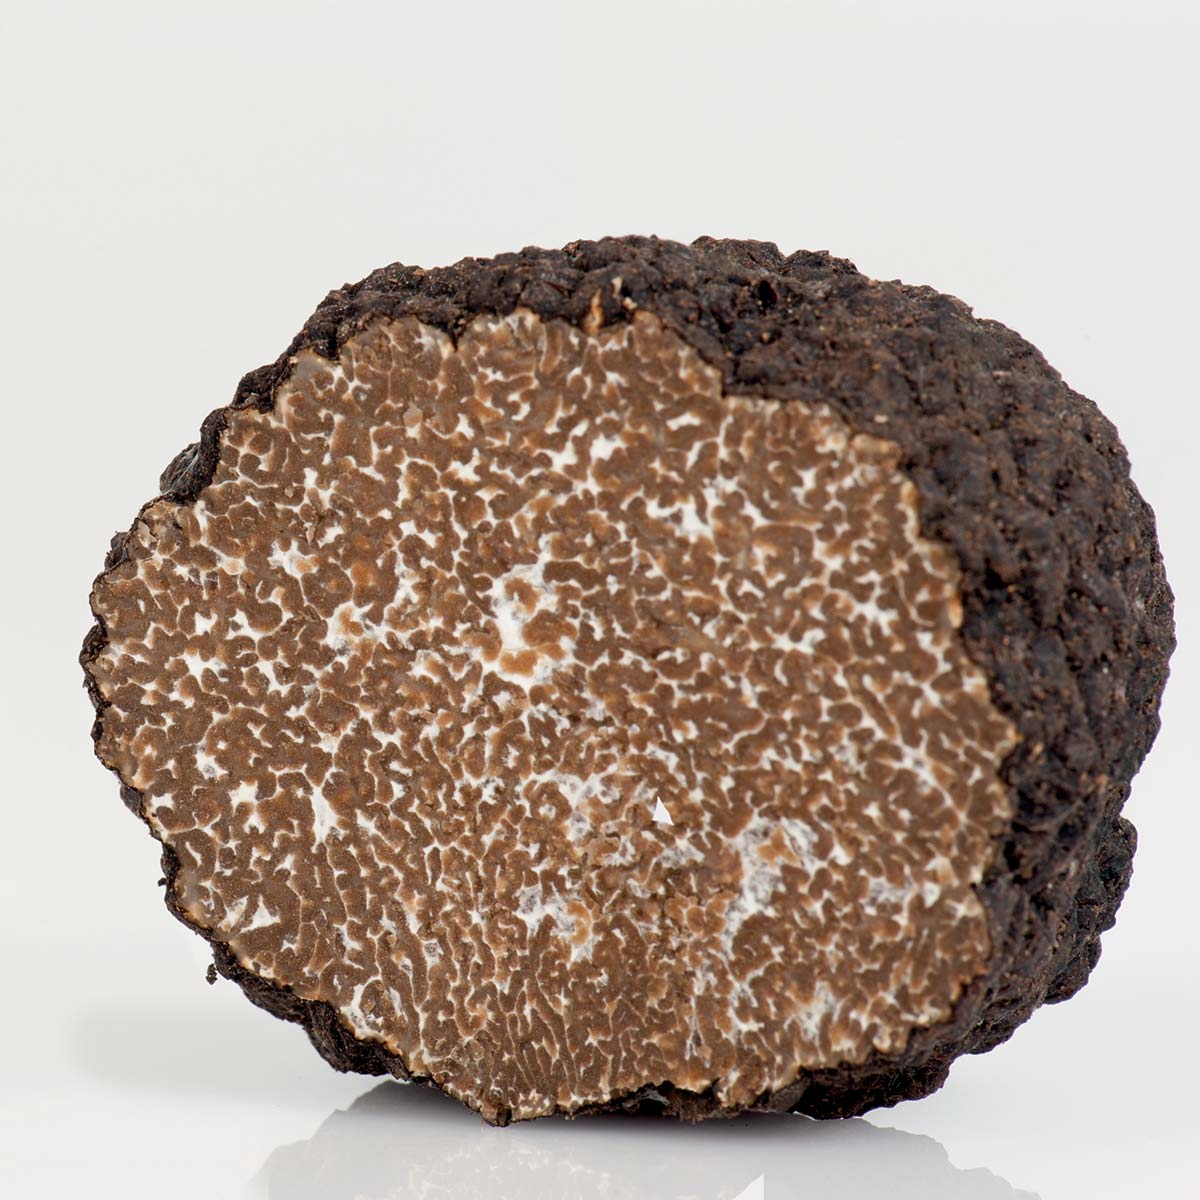 FRESH SUMMER BLACK TRUFFLE Tuber Aestivum Vittadini; best known as “Summer Scorzone” *SOLD OUT NOT IN SEASON NOW*